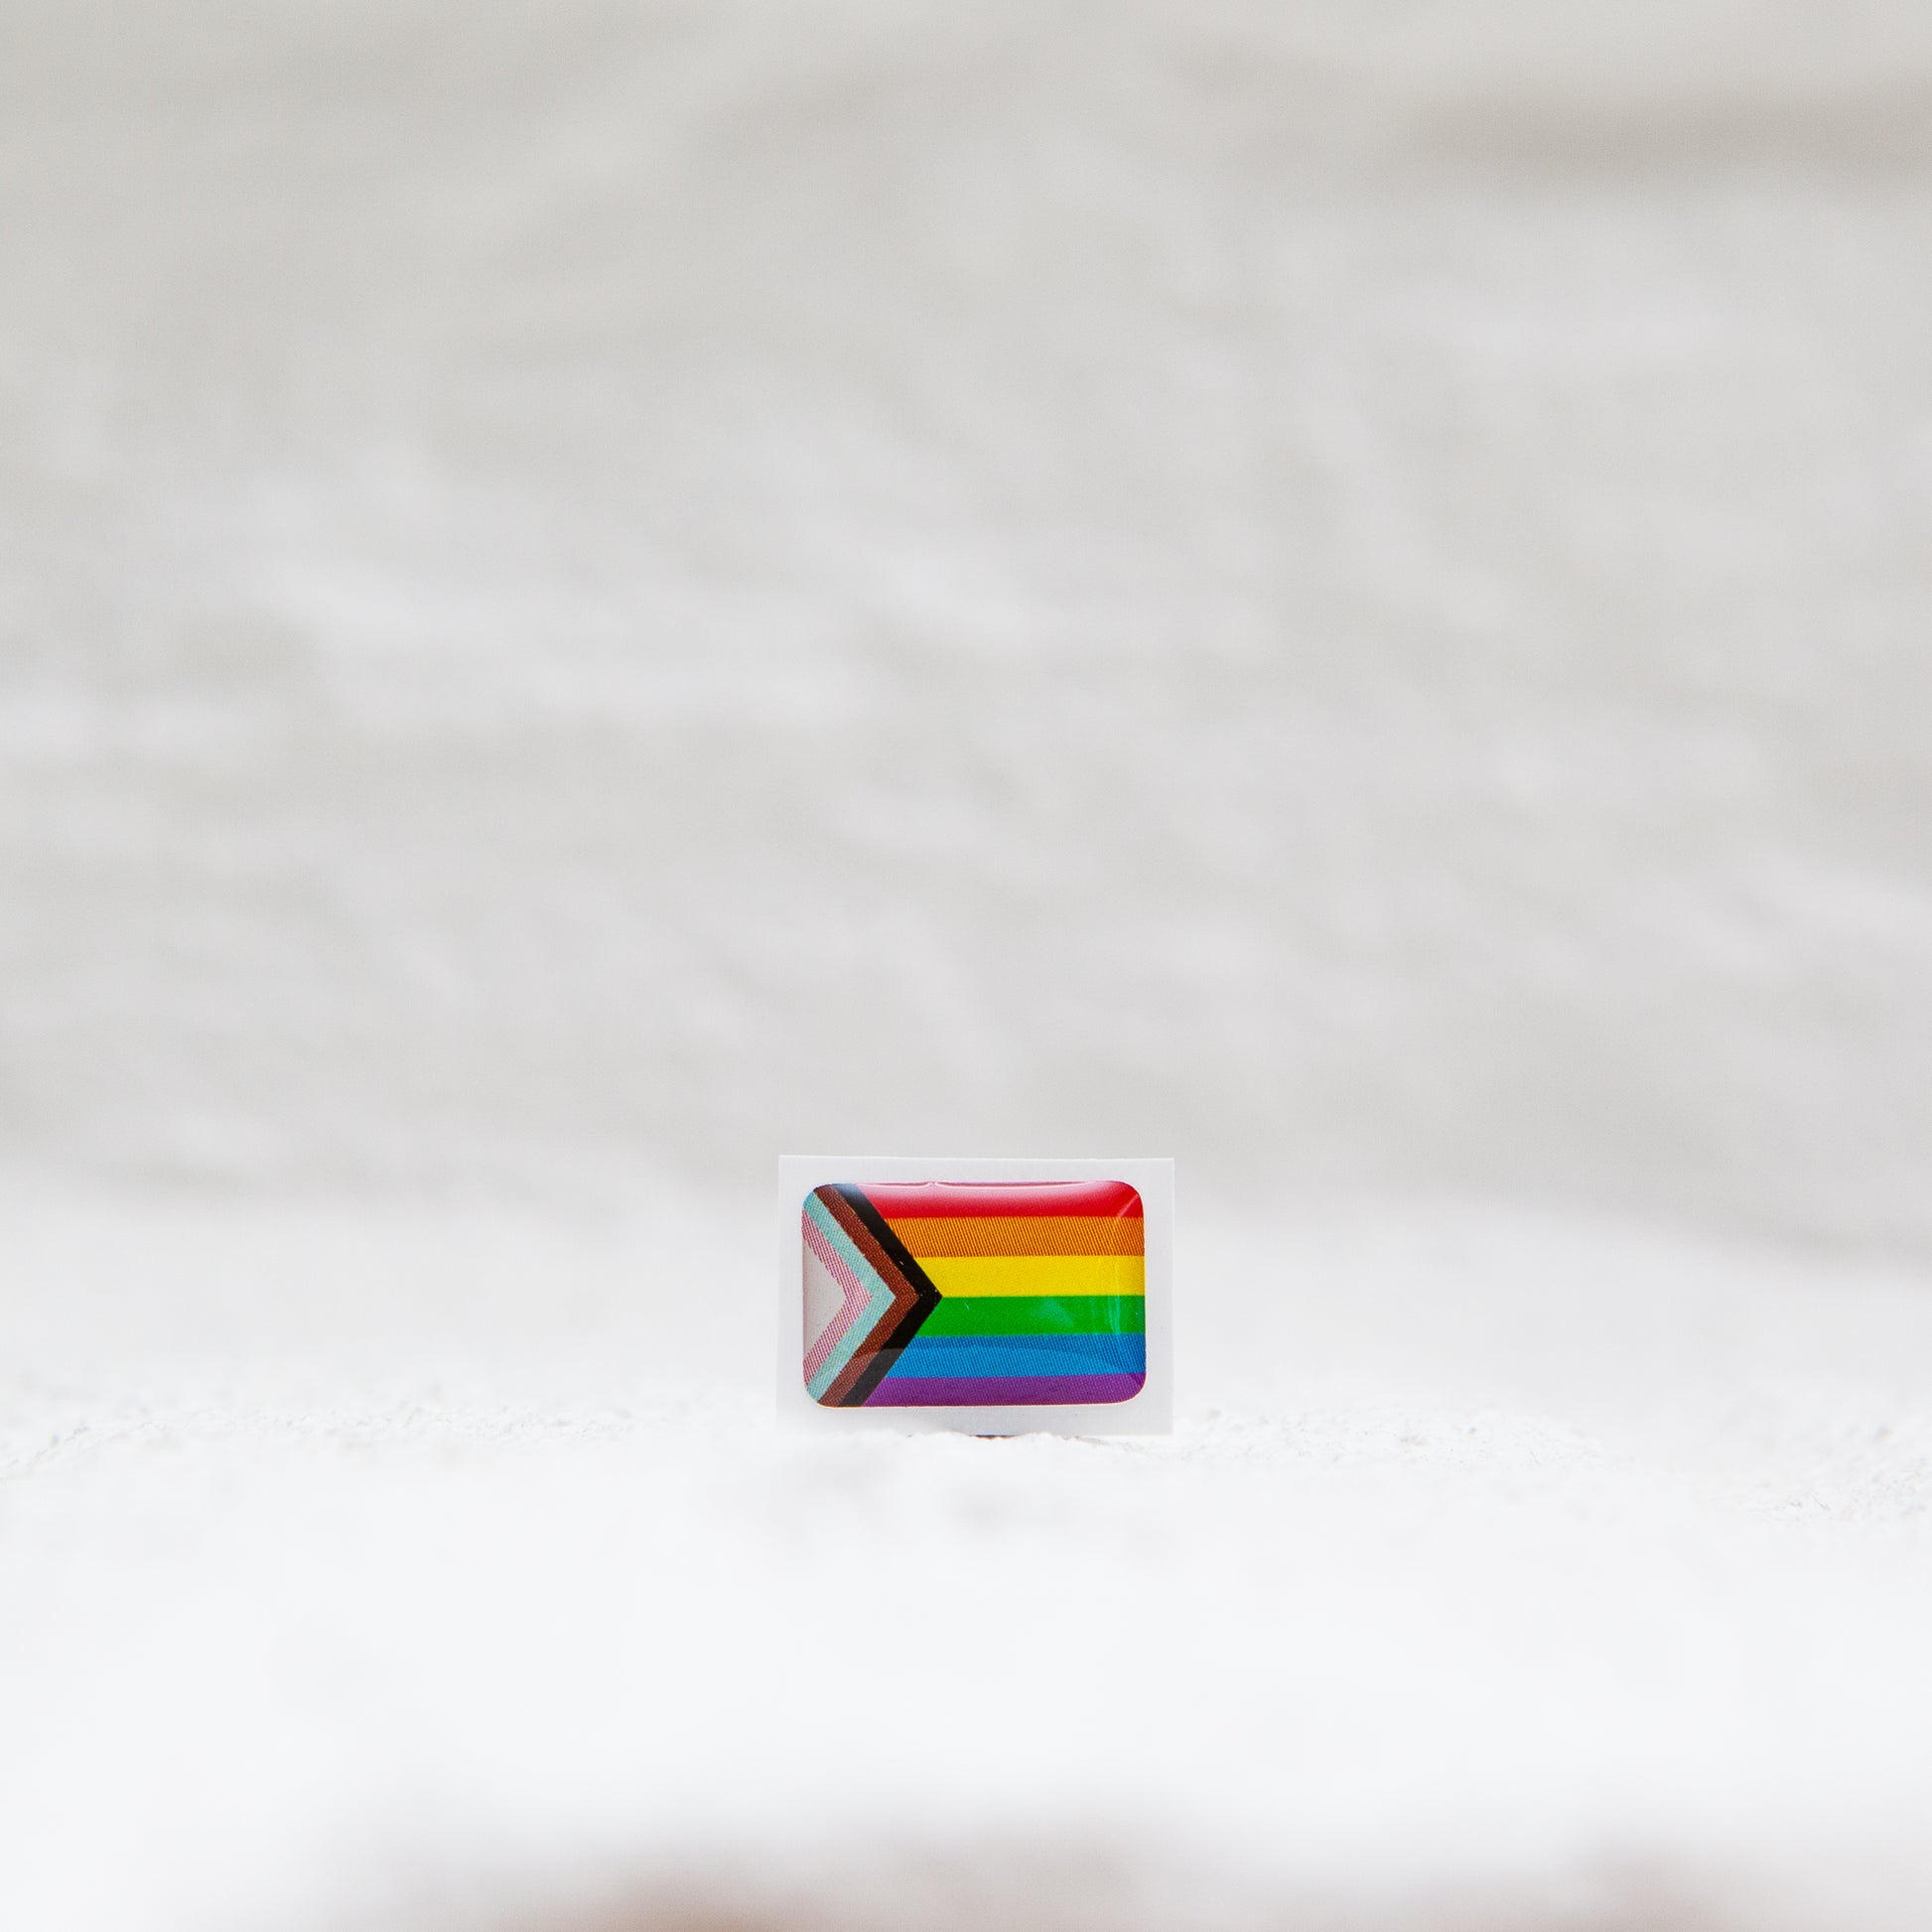 A Progress Pride Flag sticker designed for name badges and ID tags, representing the LGBTQIA+ community. A high-quality, durable gay pride LGBT sticker for inclusivity.